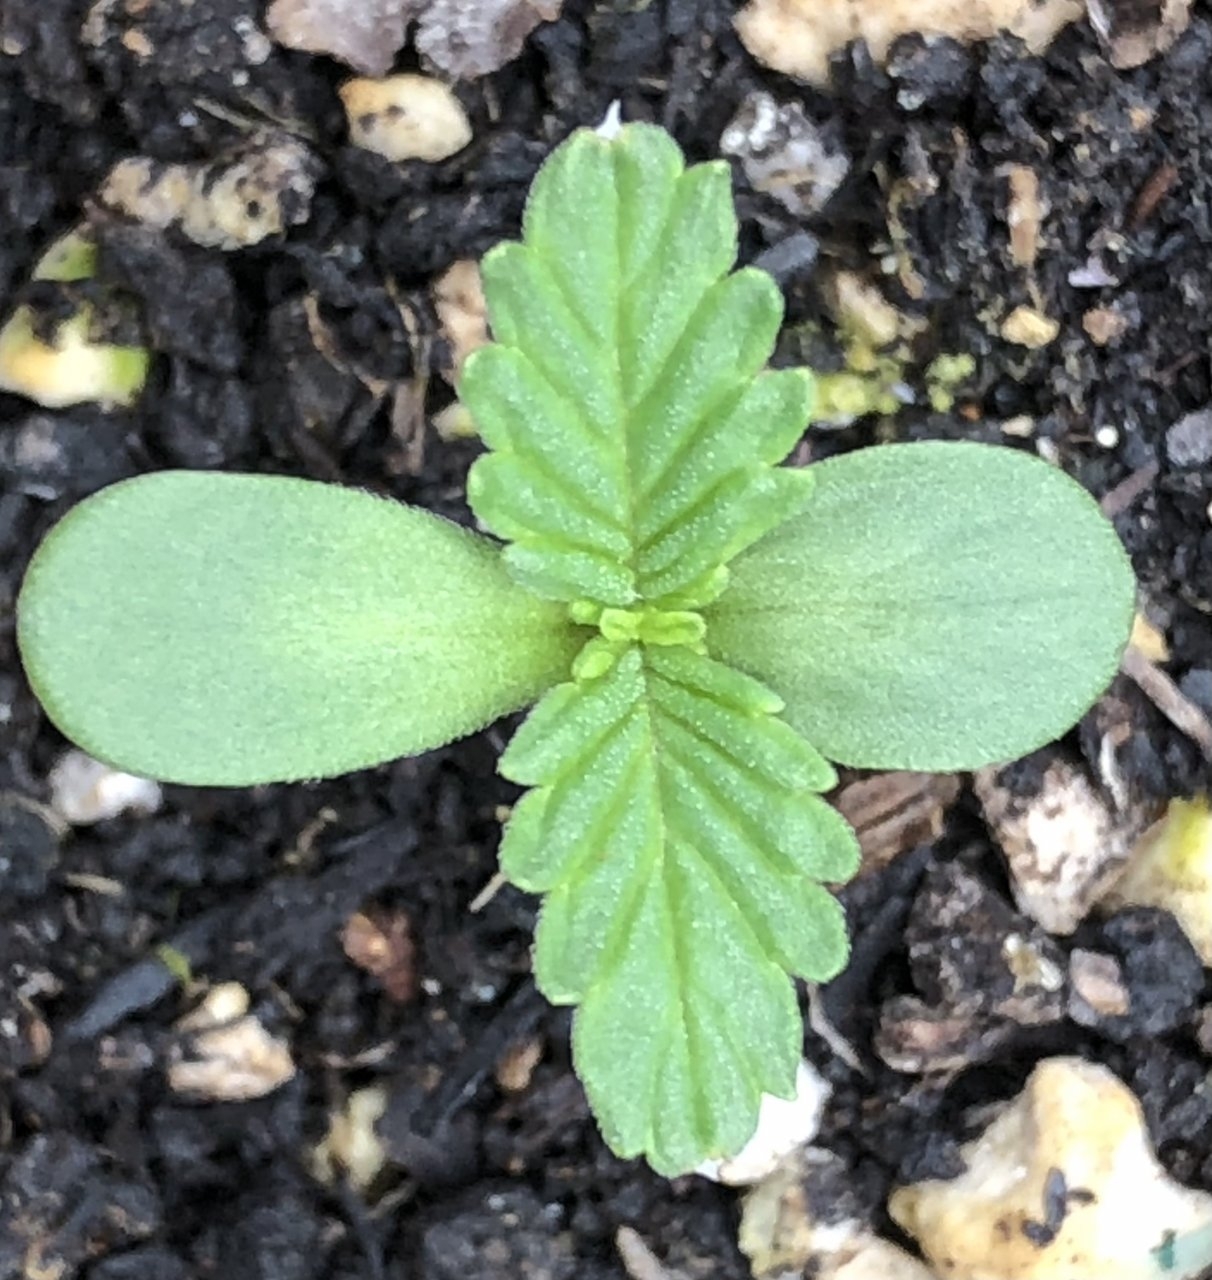 Second CBD Express auto sprouted